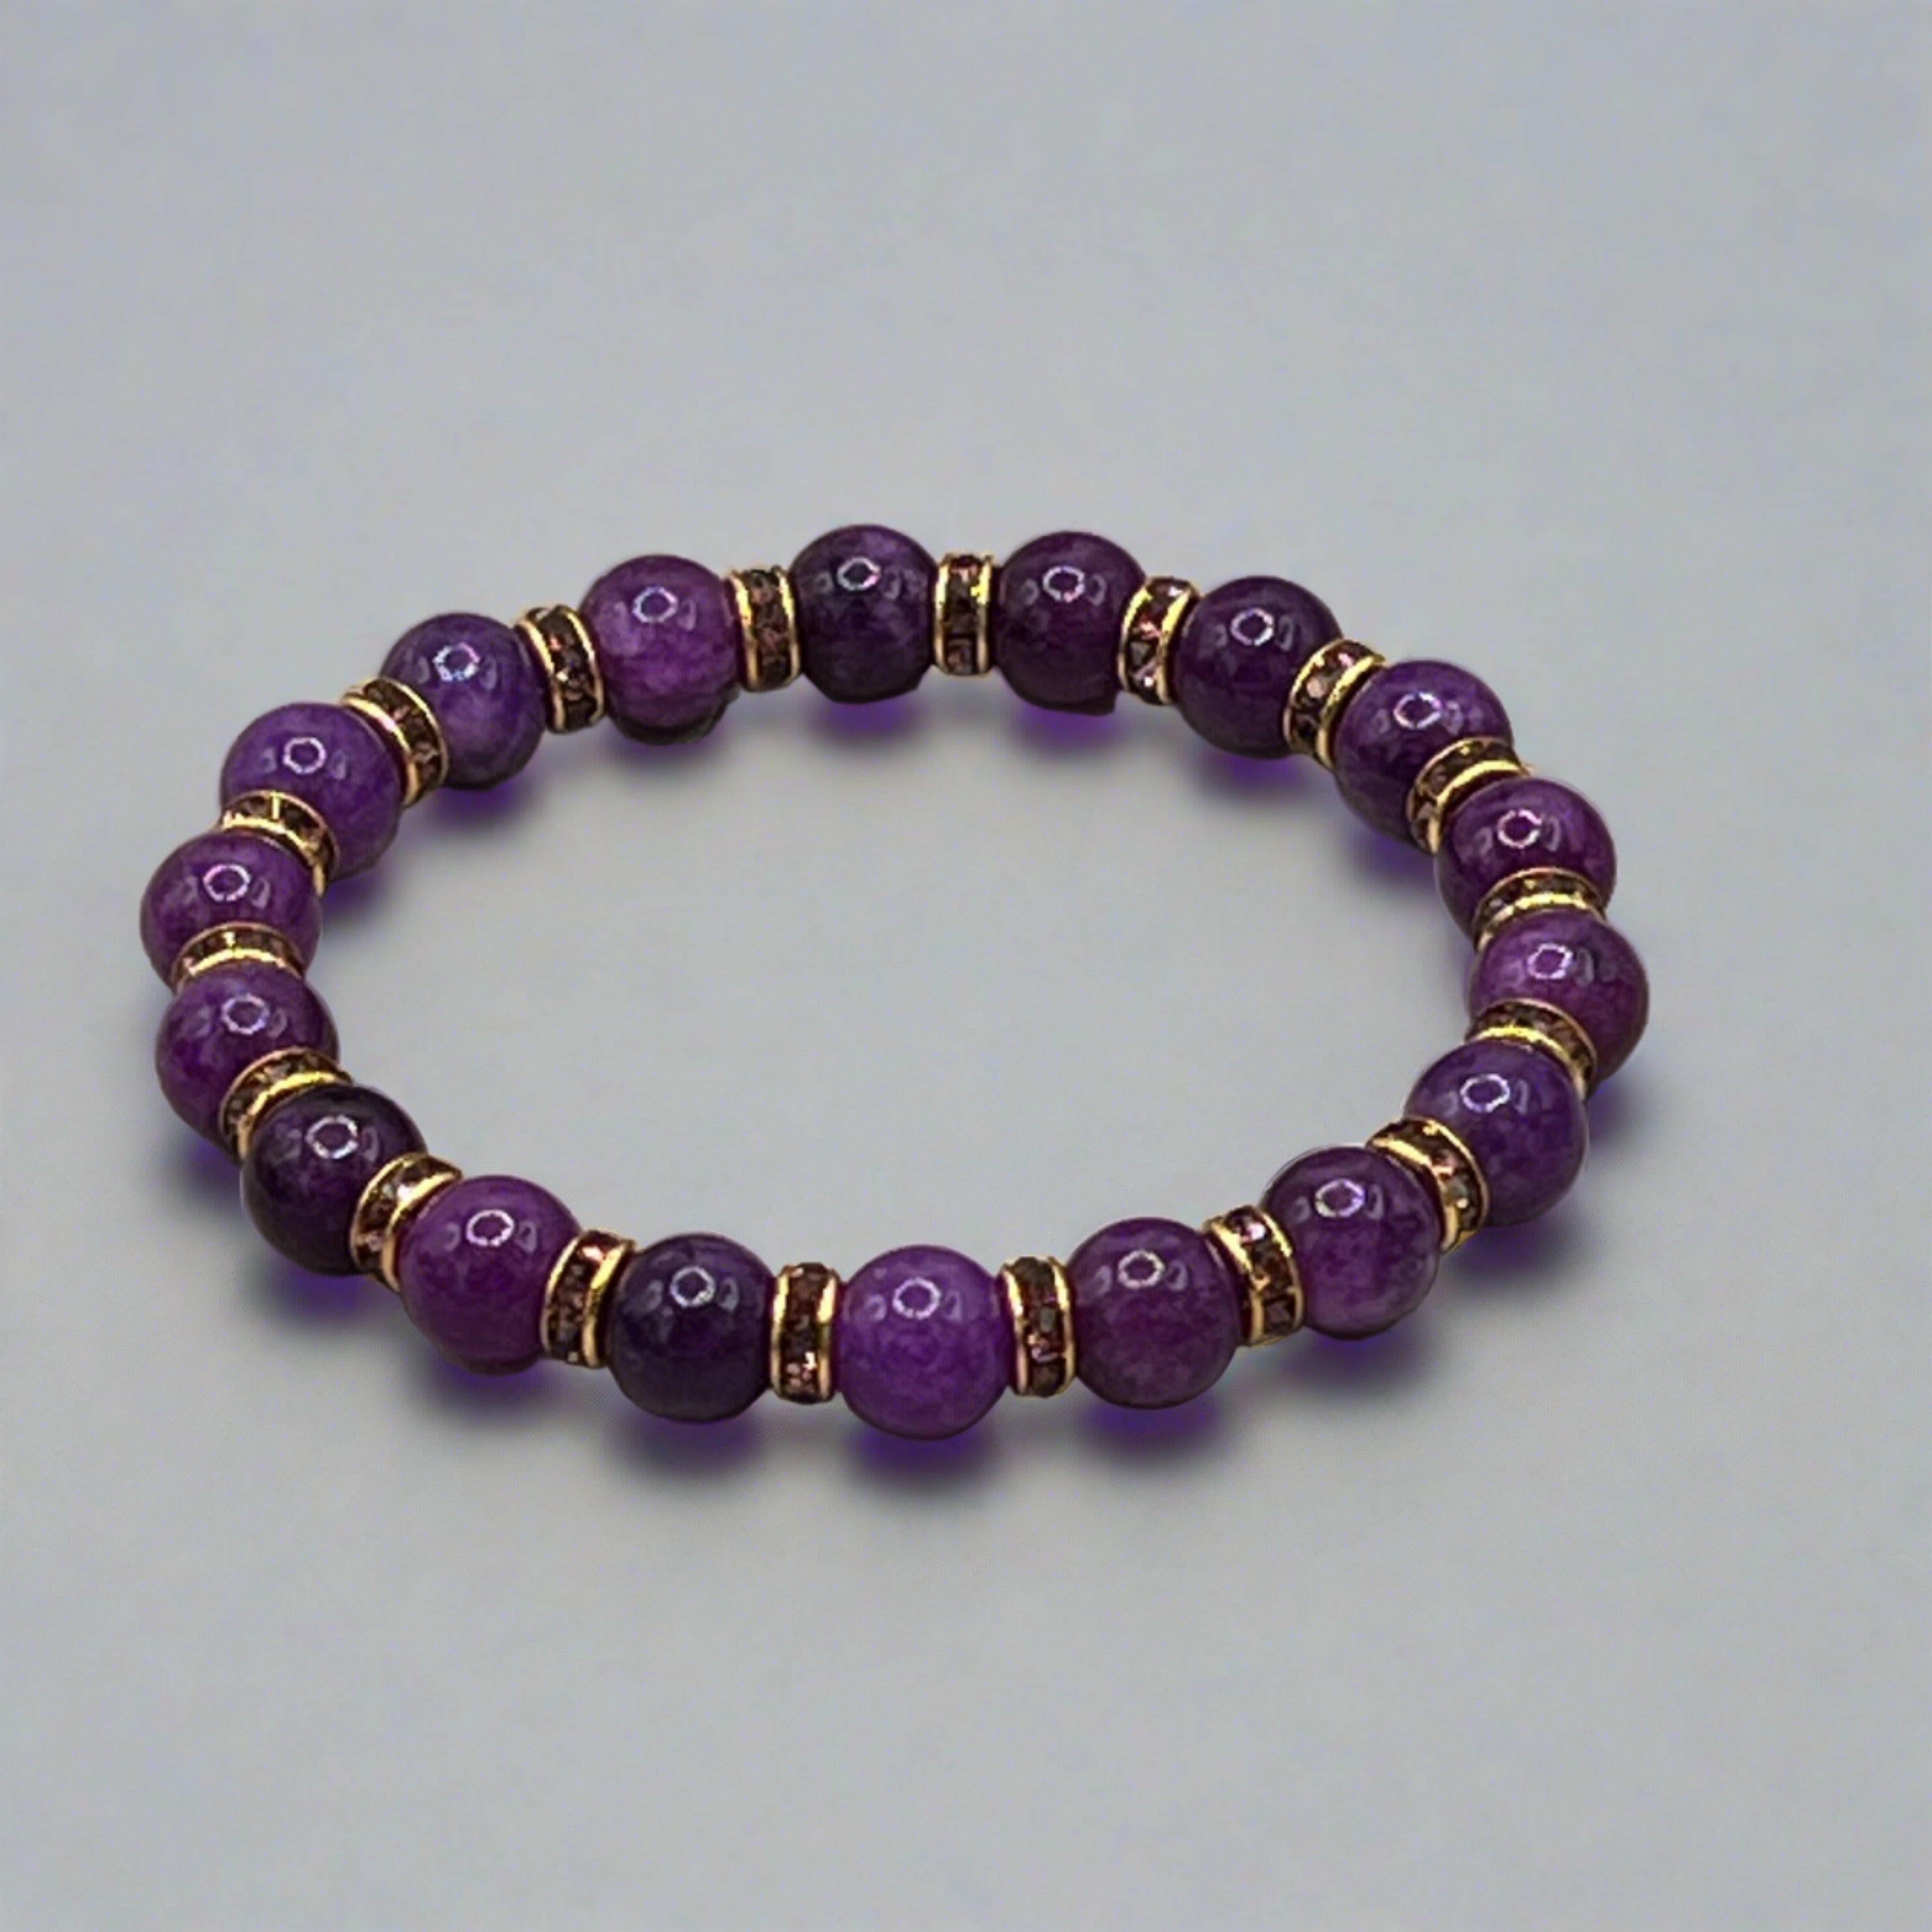 Bec Sue Jewelry Shop 6.5/ 7 / purple/ gold spacers / amethyst and purple gold rhinestones Luxe Amethyst & Gold Rhinestone Stretch Bracelet - Serenity in Sparkle, Elegant Purple Amethyst Bracelet with Gold Rhinestone Accents Tags 656